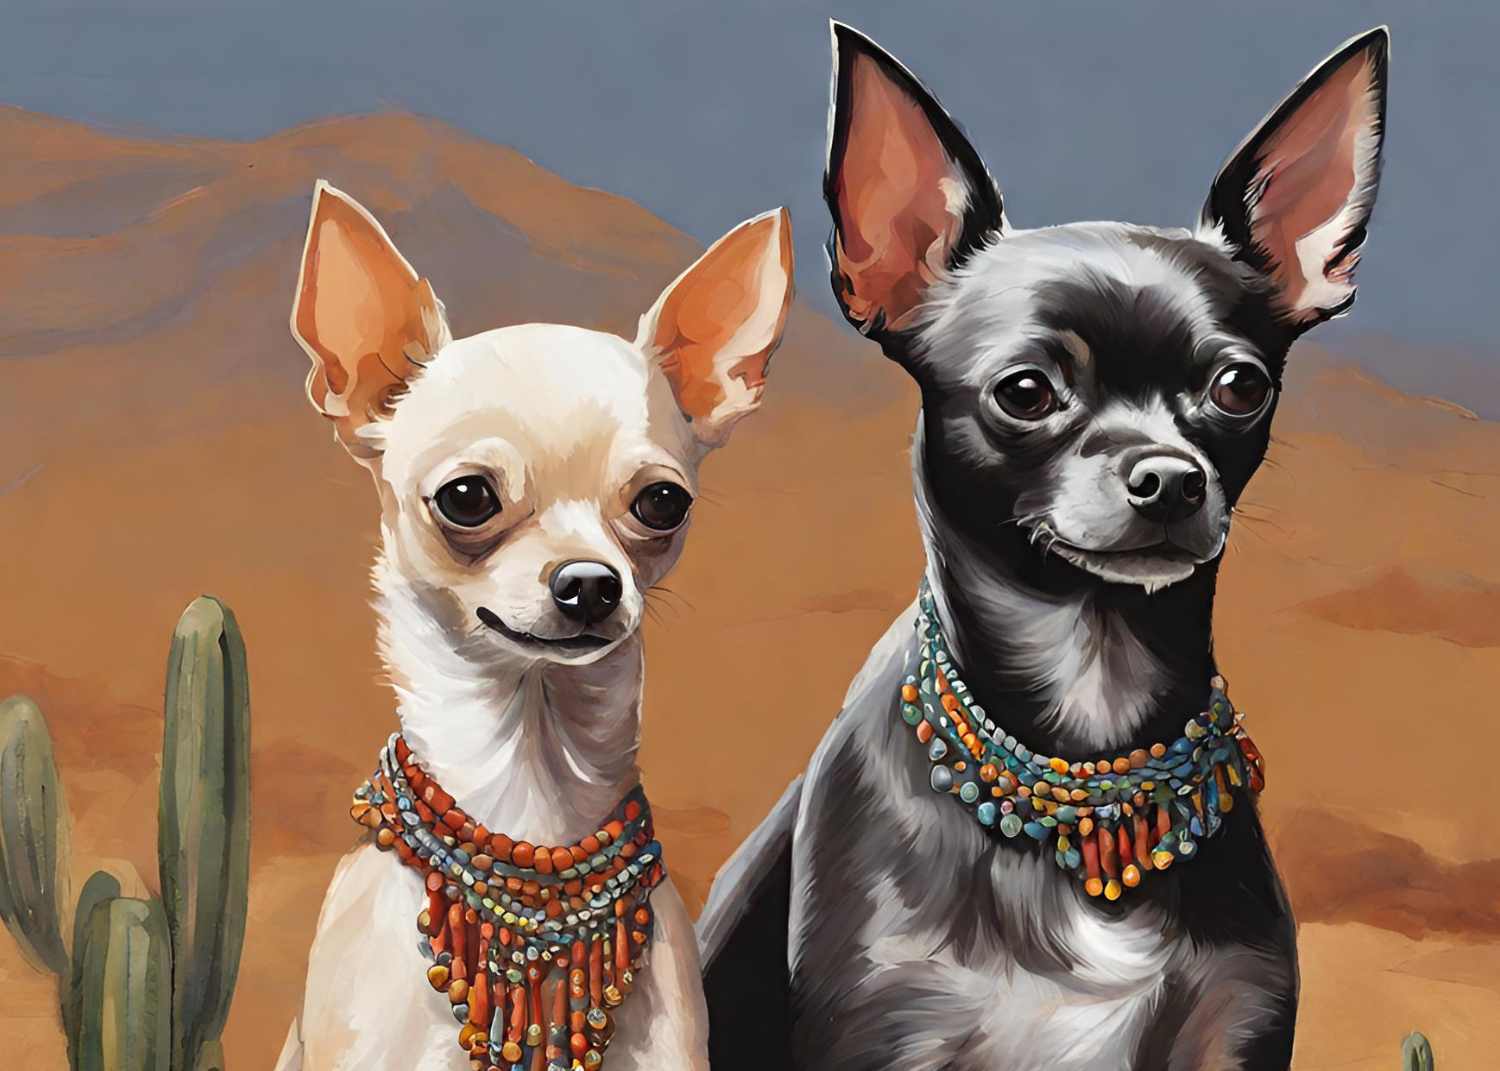 two Chihuahuas digital art with desert mountains and a cactus in the background